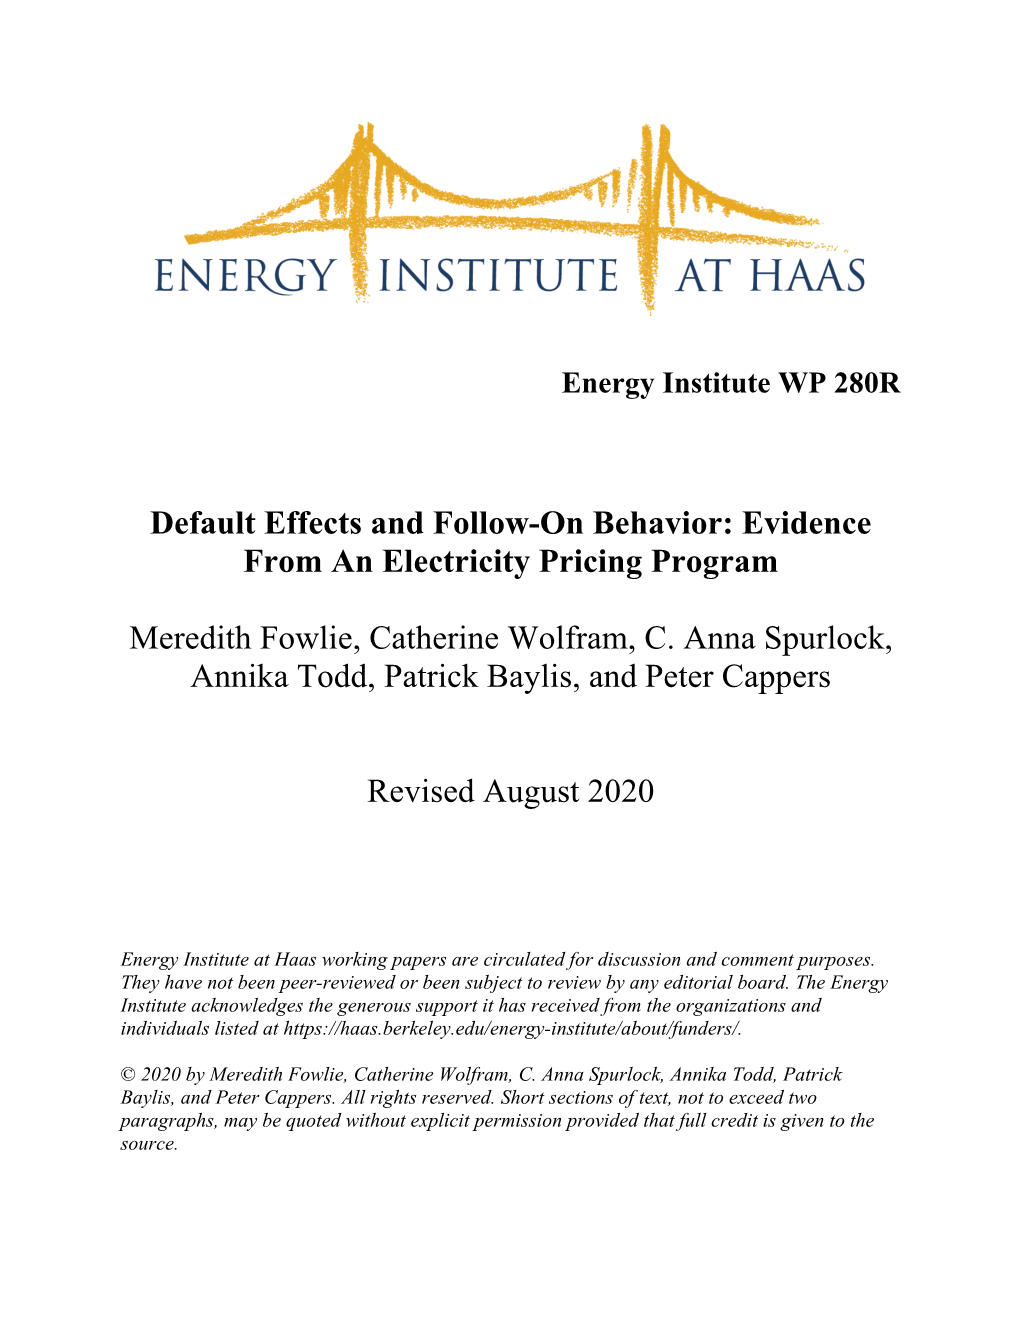 Default Effects and Follow-On Behavior: Evidence from an Electricity Pricing Program Meredith Fowlie, Catherine Wolfram, C. Anna